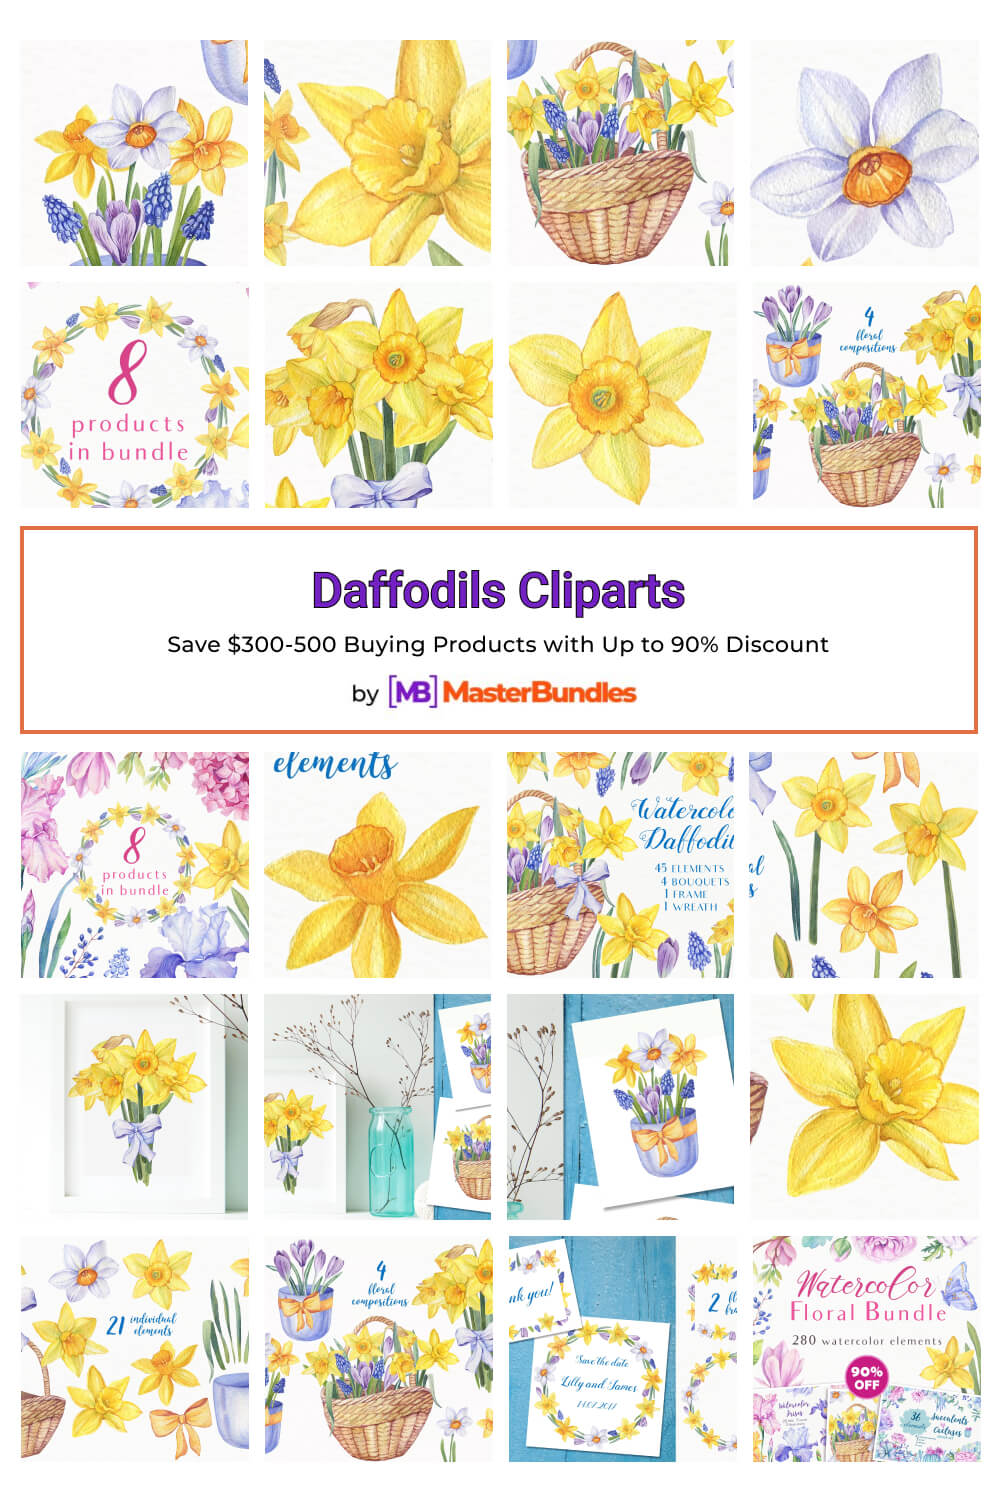 daffodils cliparts pinterest image.